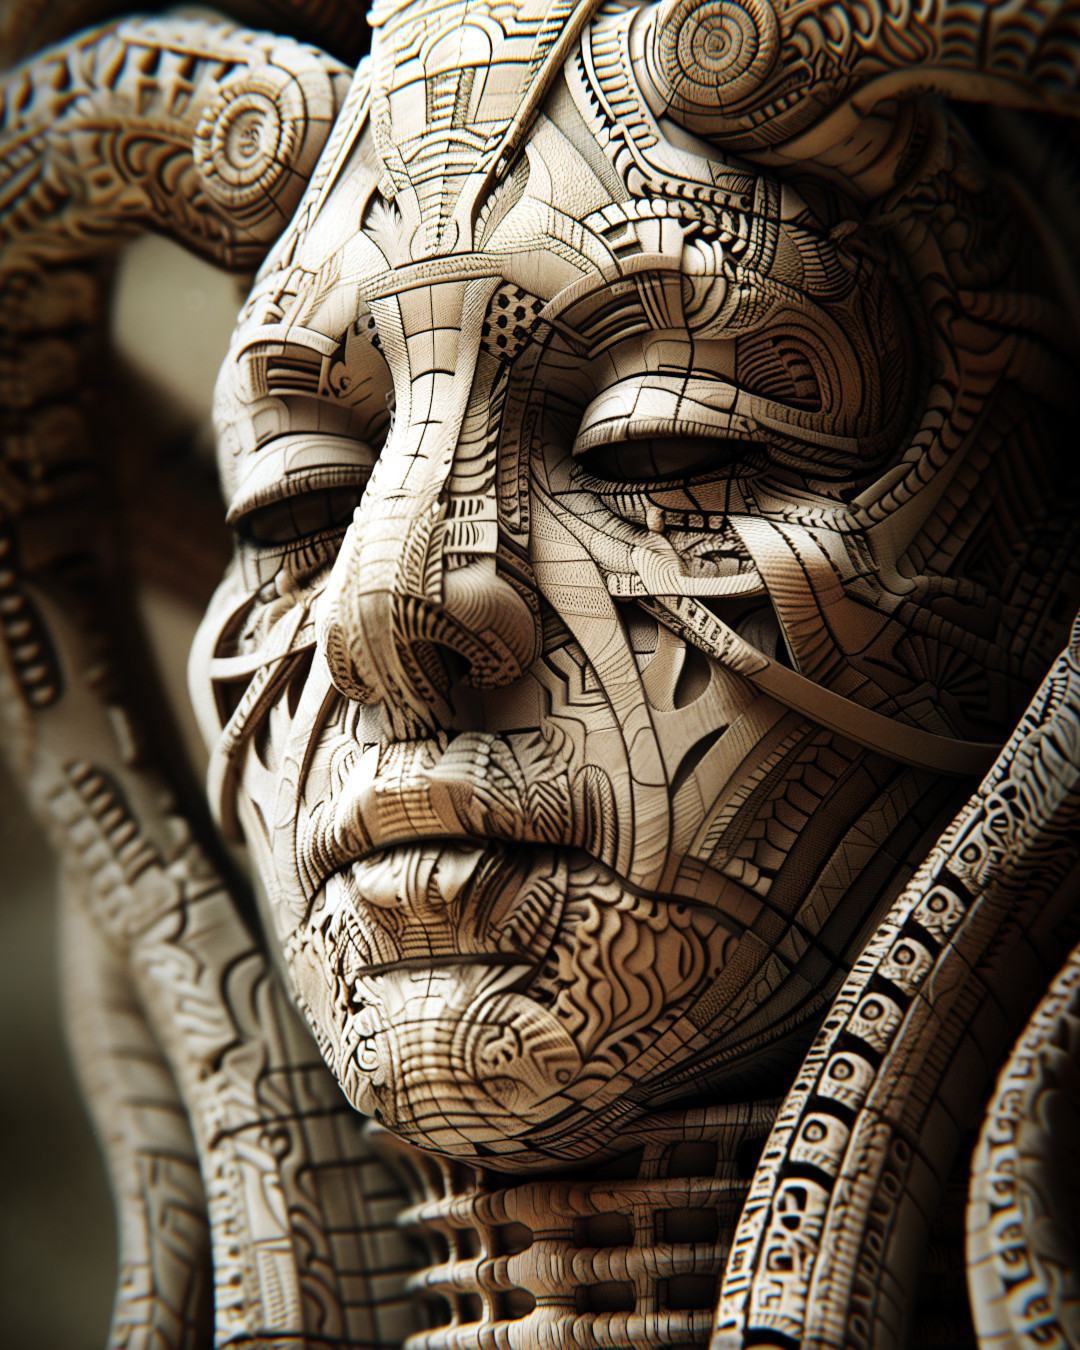 Intricate wooden sculpture, geometric patterns, shades of brown